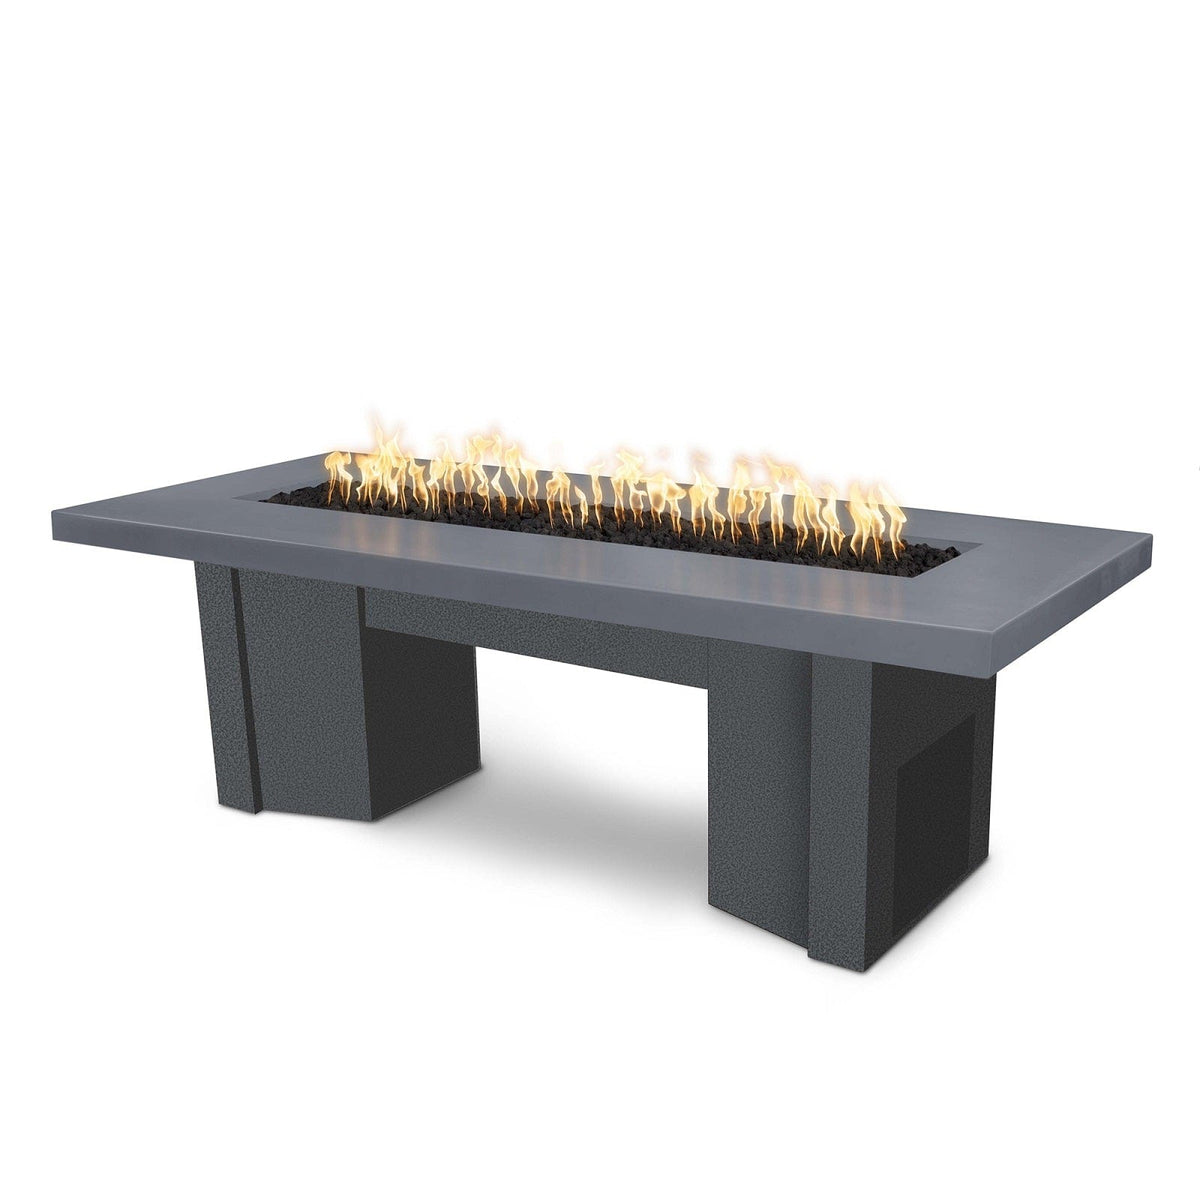 The Outdoor Plus Fire Features Gray (-GRY) / Silver Vein Powder Coated Steel (-SLV) The Outdoor Plus 60&quot; Alameda Fire Table Smooth Concrete in Liquid Propane - Match Lit with Flame Sense System / OPT-ALMGFRC60FSML-LP